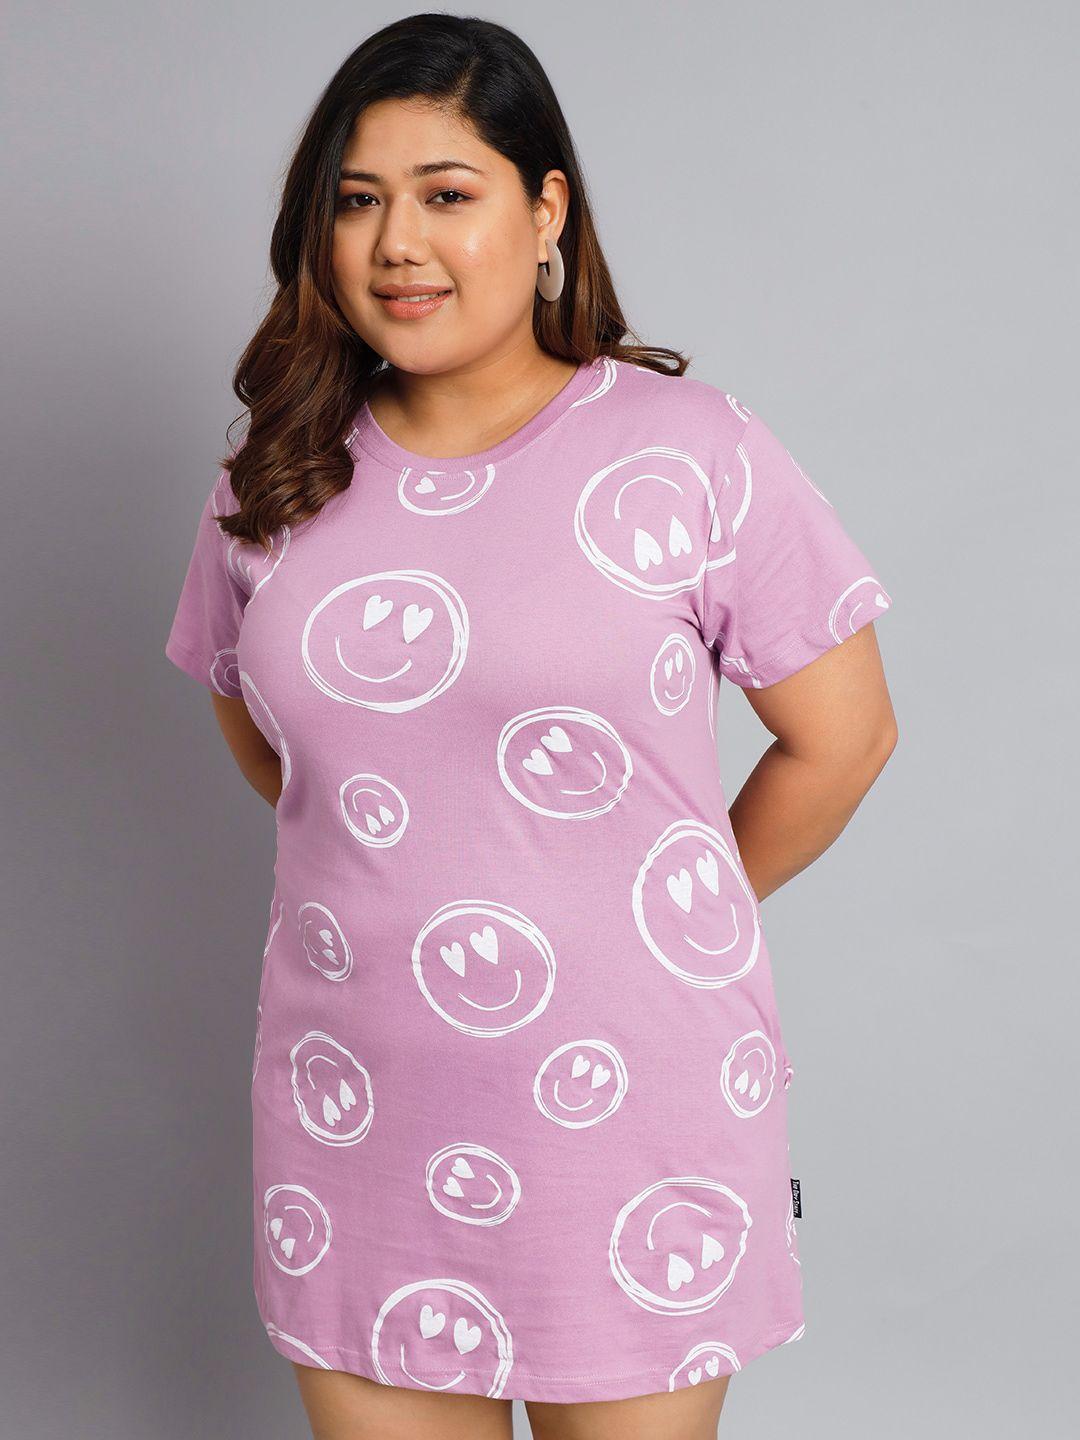 beyound size - the dry state plus size conversational printed cotton t-shirt mini dress